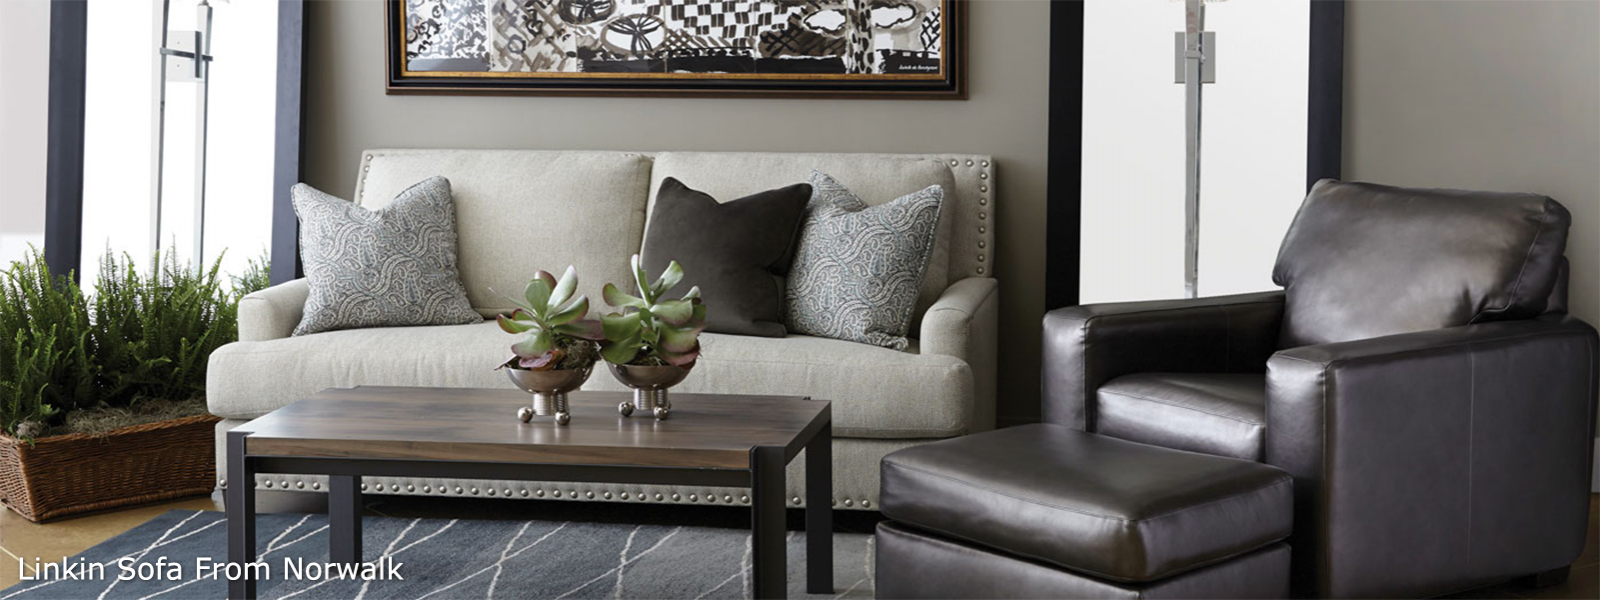 Get sofas and chairs and give a new look
to your living room